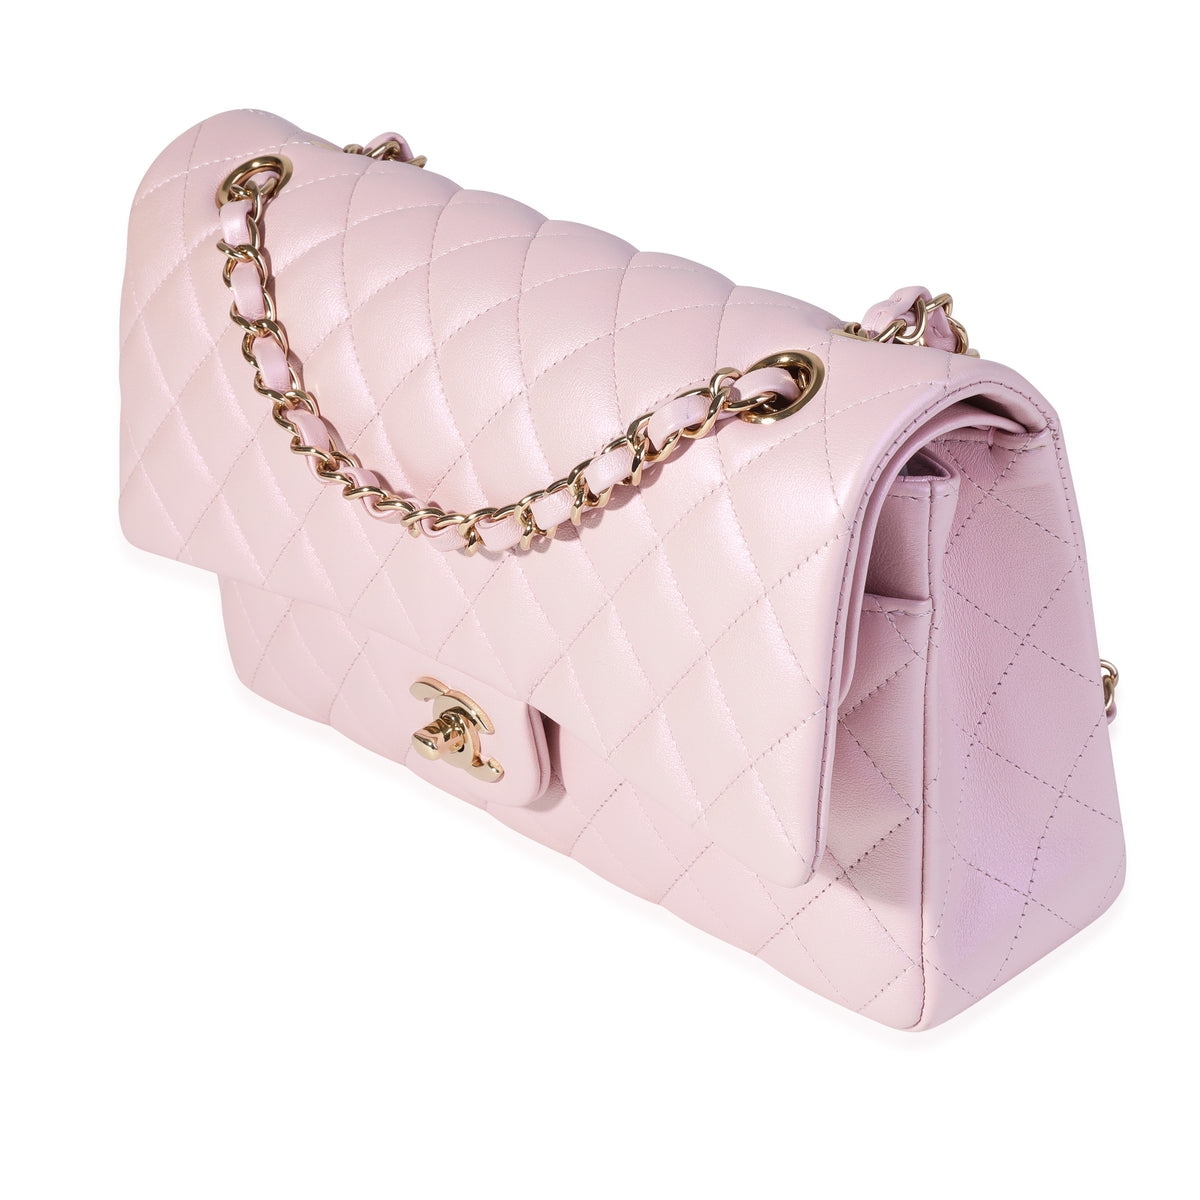 Chanel Pink Iridescent Quilted Lambskin Medium Classic Double Flap Bag, myGemma